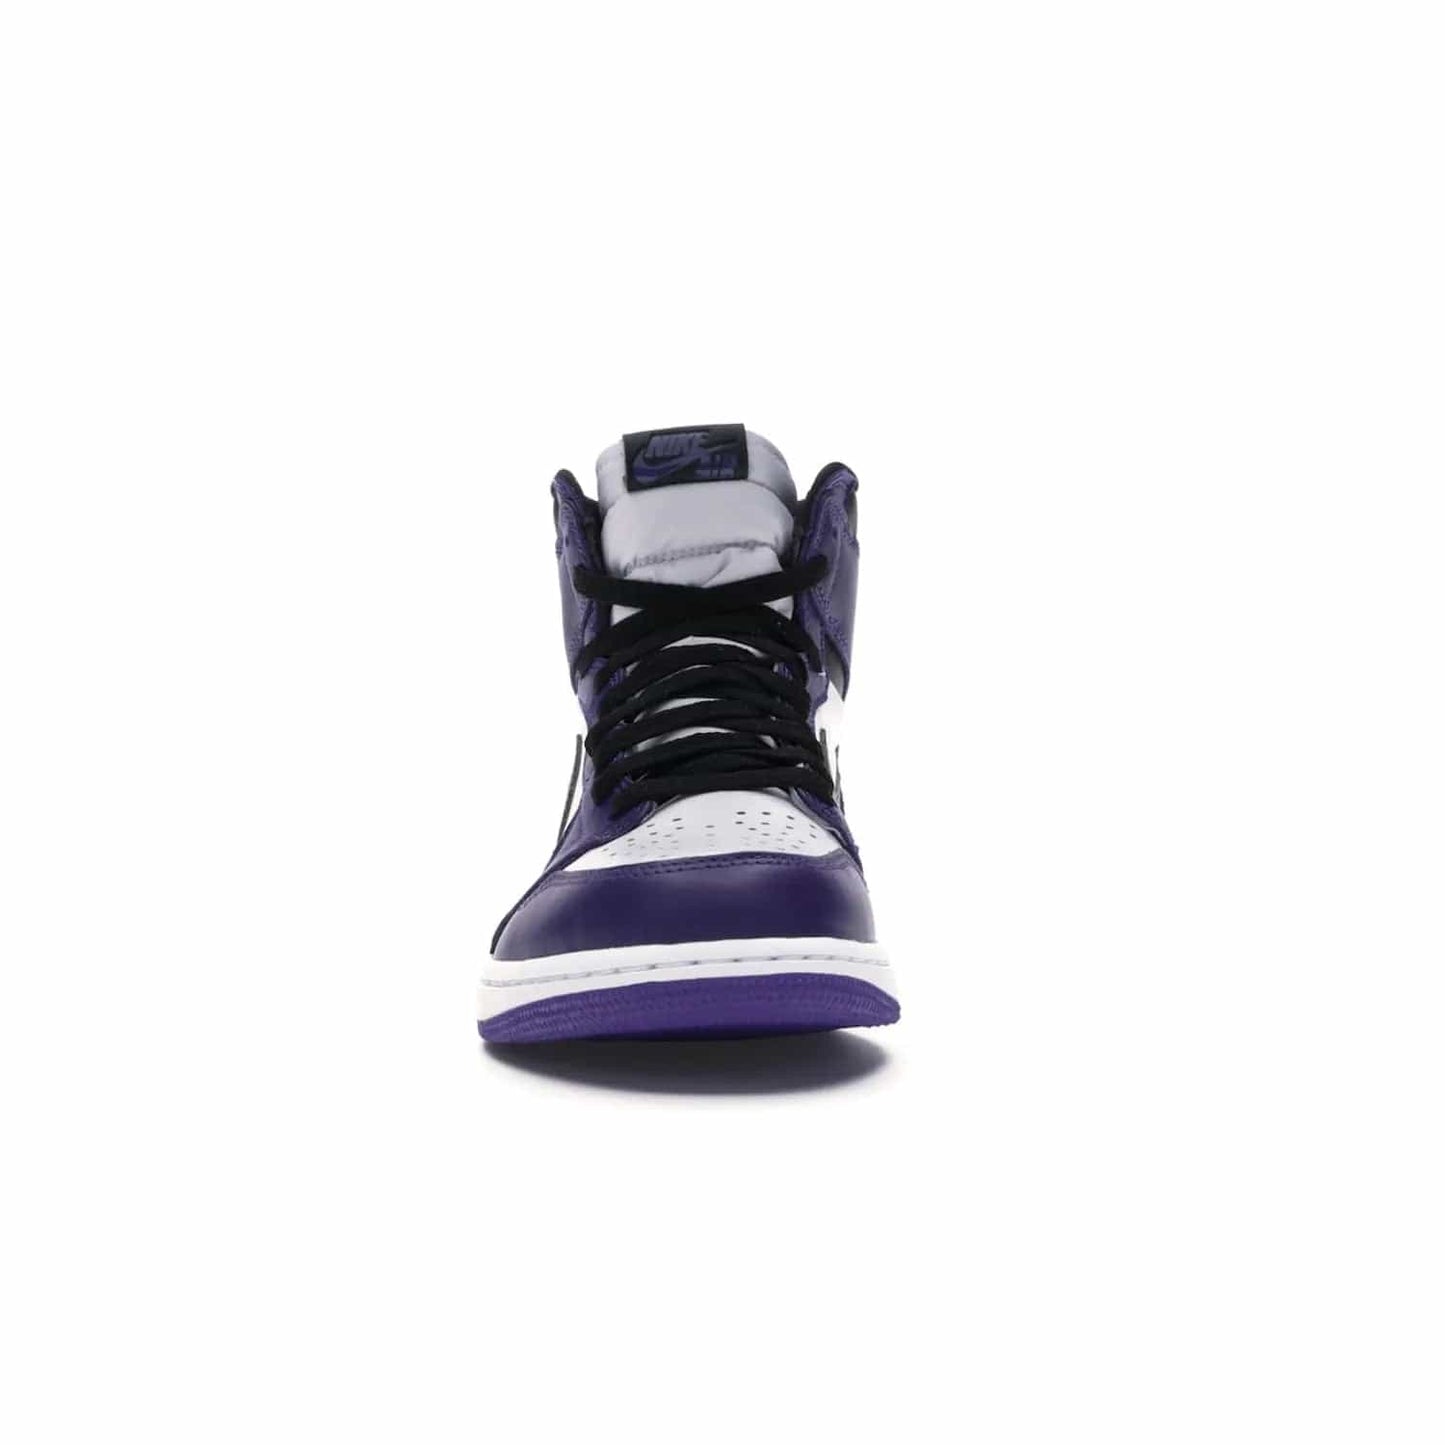 Jordan 1 Retro High Court Purple White - Image 10 - Only at www.BallersClubKickz.com - Grab the classic Jordan 1 Retro High Court Purple White and add major flavor to your collection. White leather upper with Court Purple overlays and Swoosh logo. White midsole and purple outsole. Get yours and rep your Jordan Brand.